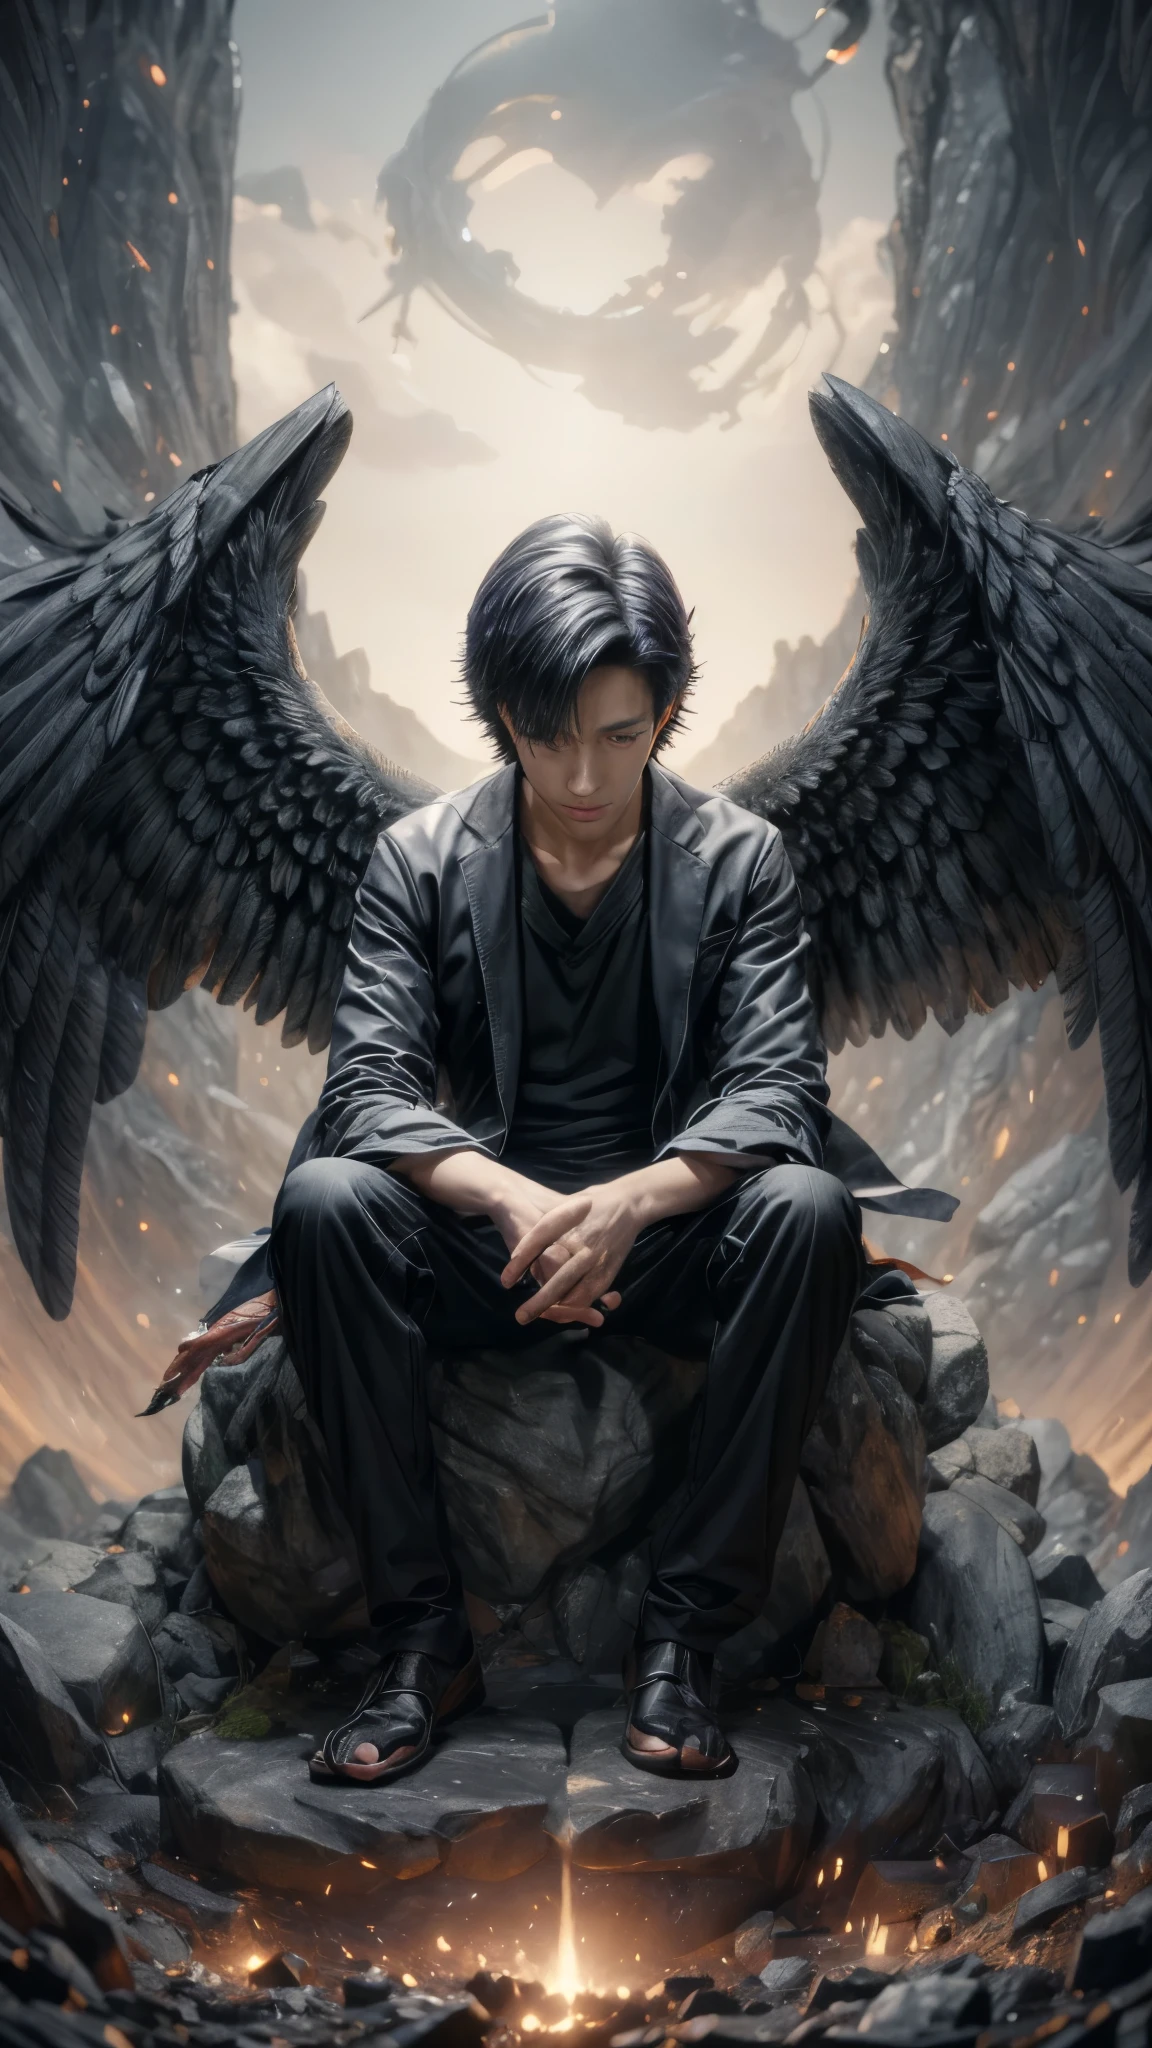 style illustration of a man with wings sitting on a rock, winged boy, 4 k manga wallpaper, winged human, 4k anime wallpaper, black wings instead of arms, anime wallaper, anime art wallpaper 4k, anime art wallpaper 4 k, anime art wallpaper 8 k, dark feathered wings, young wan angel, low angel, anime wallpaper 4 k